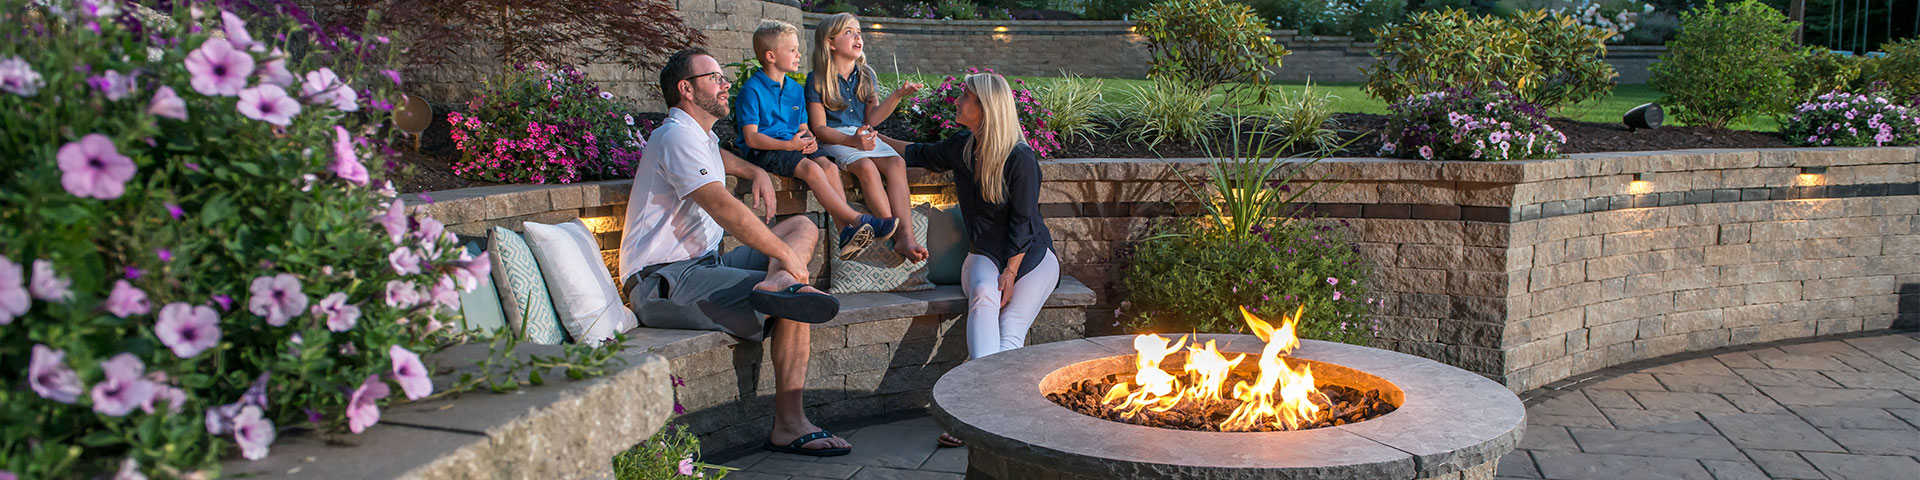 Family sitting on Retaining Wall around Unilock Outdoor Fire Pit 